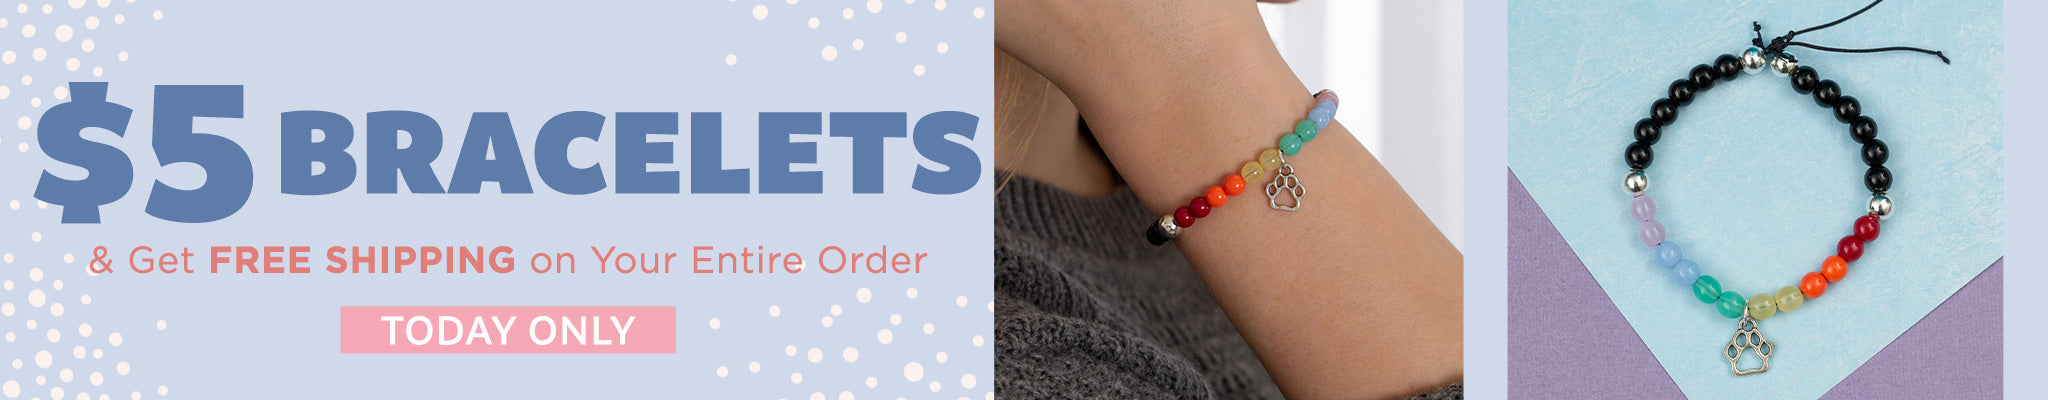 $5 Bracelets & Get FREE Shipping on Your Entire Order | Today Only